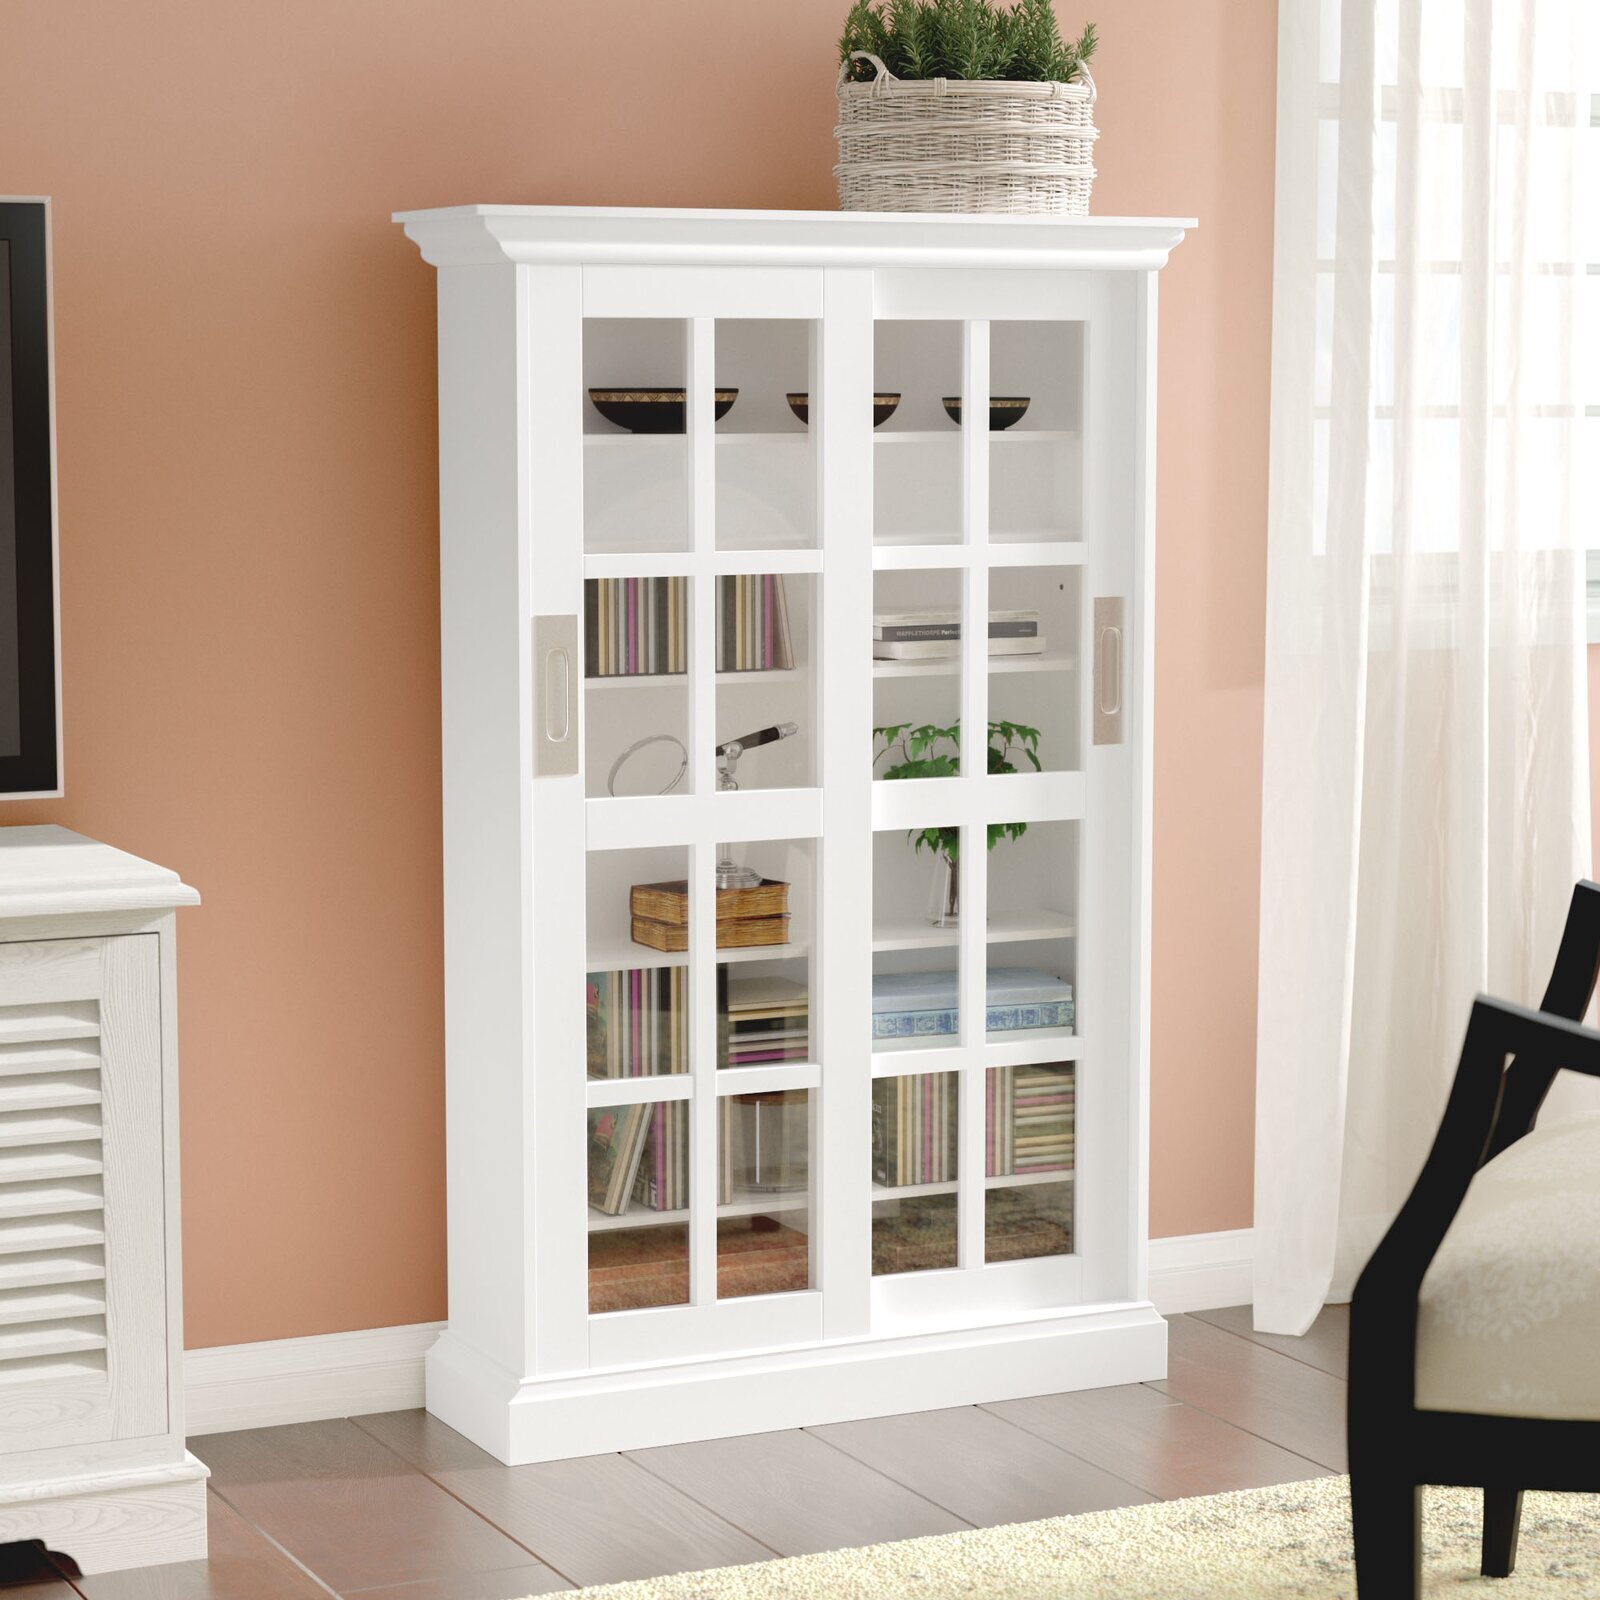 CD shelving with glass paneled doors